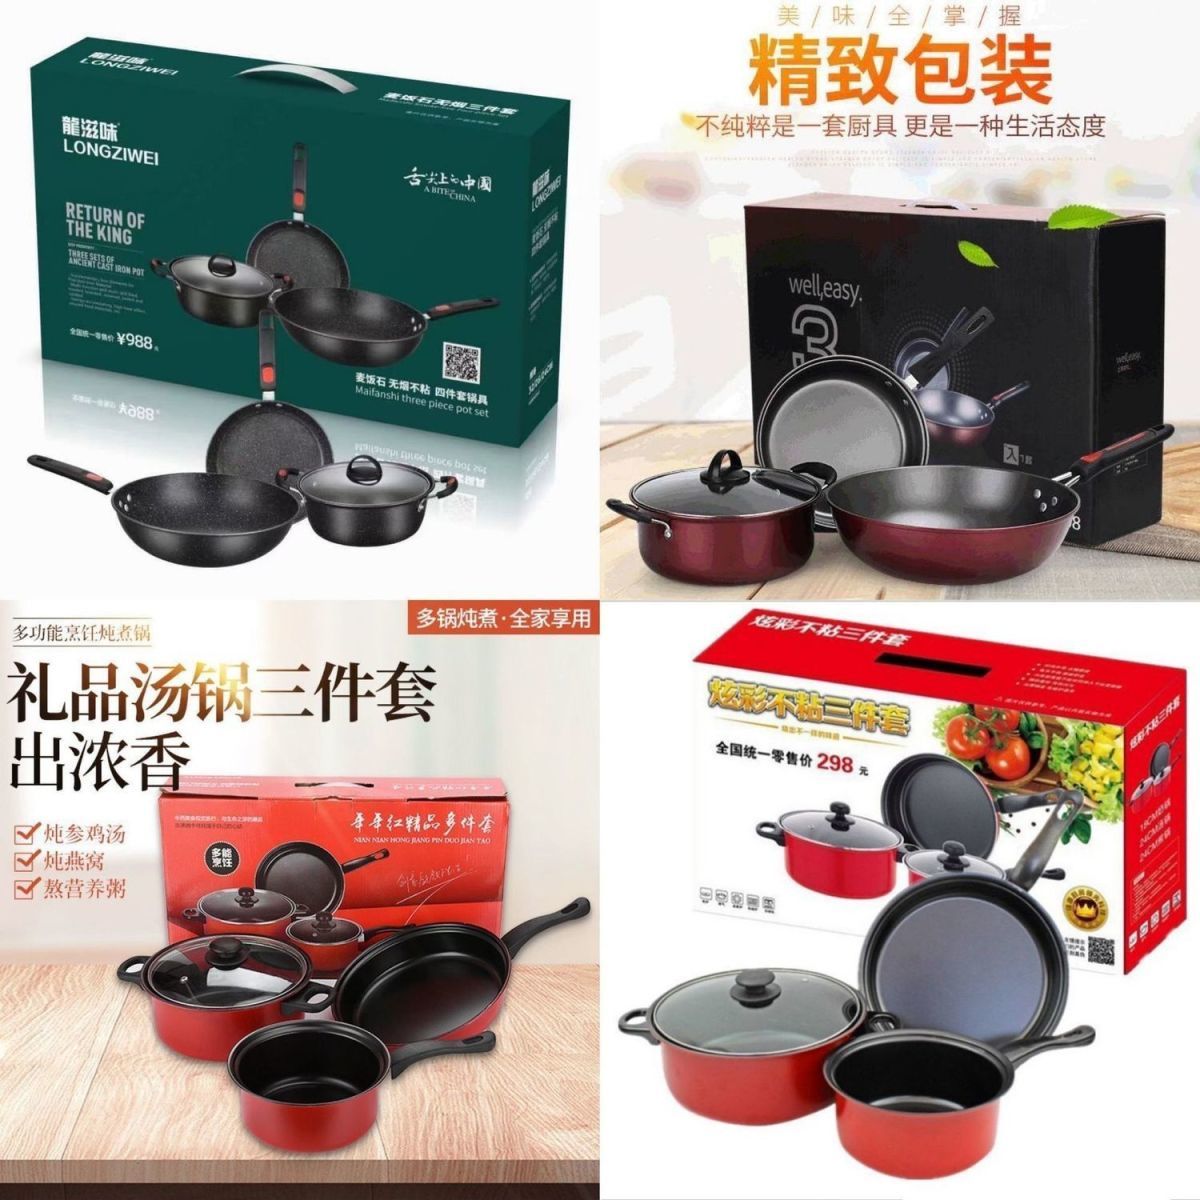 Small Household Appliances Elegant Practical Sales Insurance Company Activity Gifts 4S Store Sales Department Gifts Pot Kitchenware Set